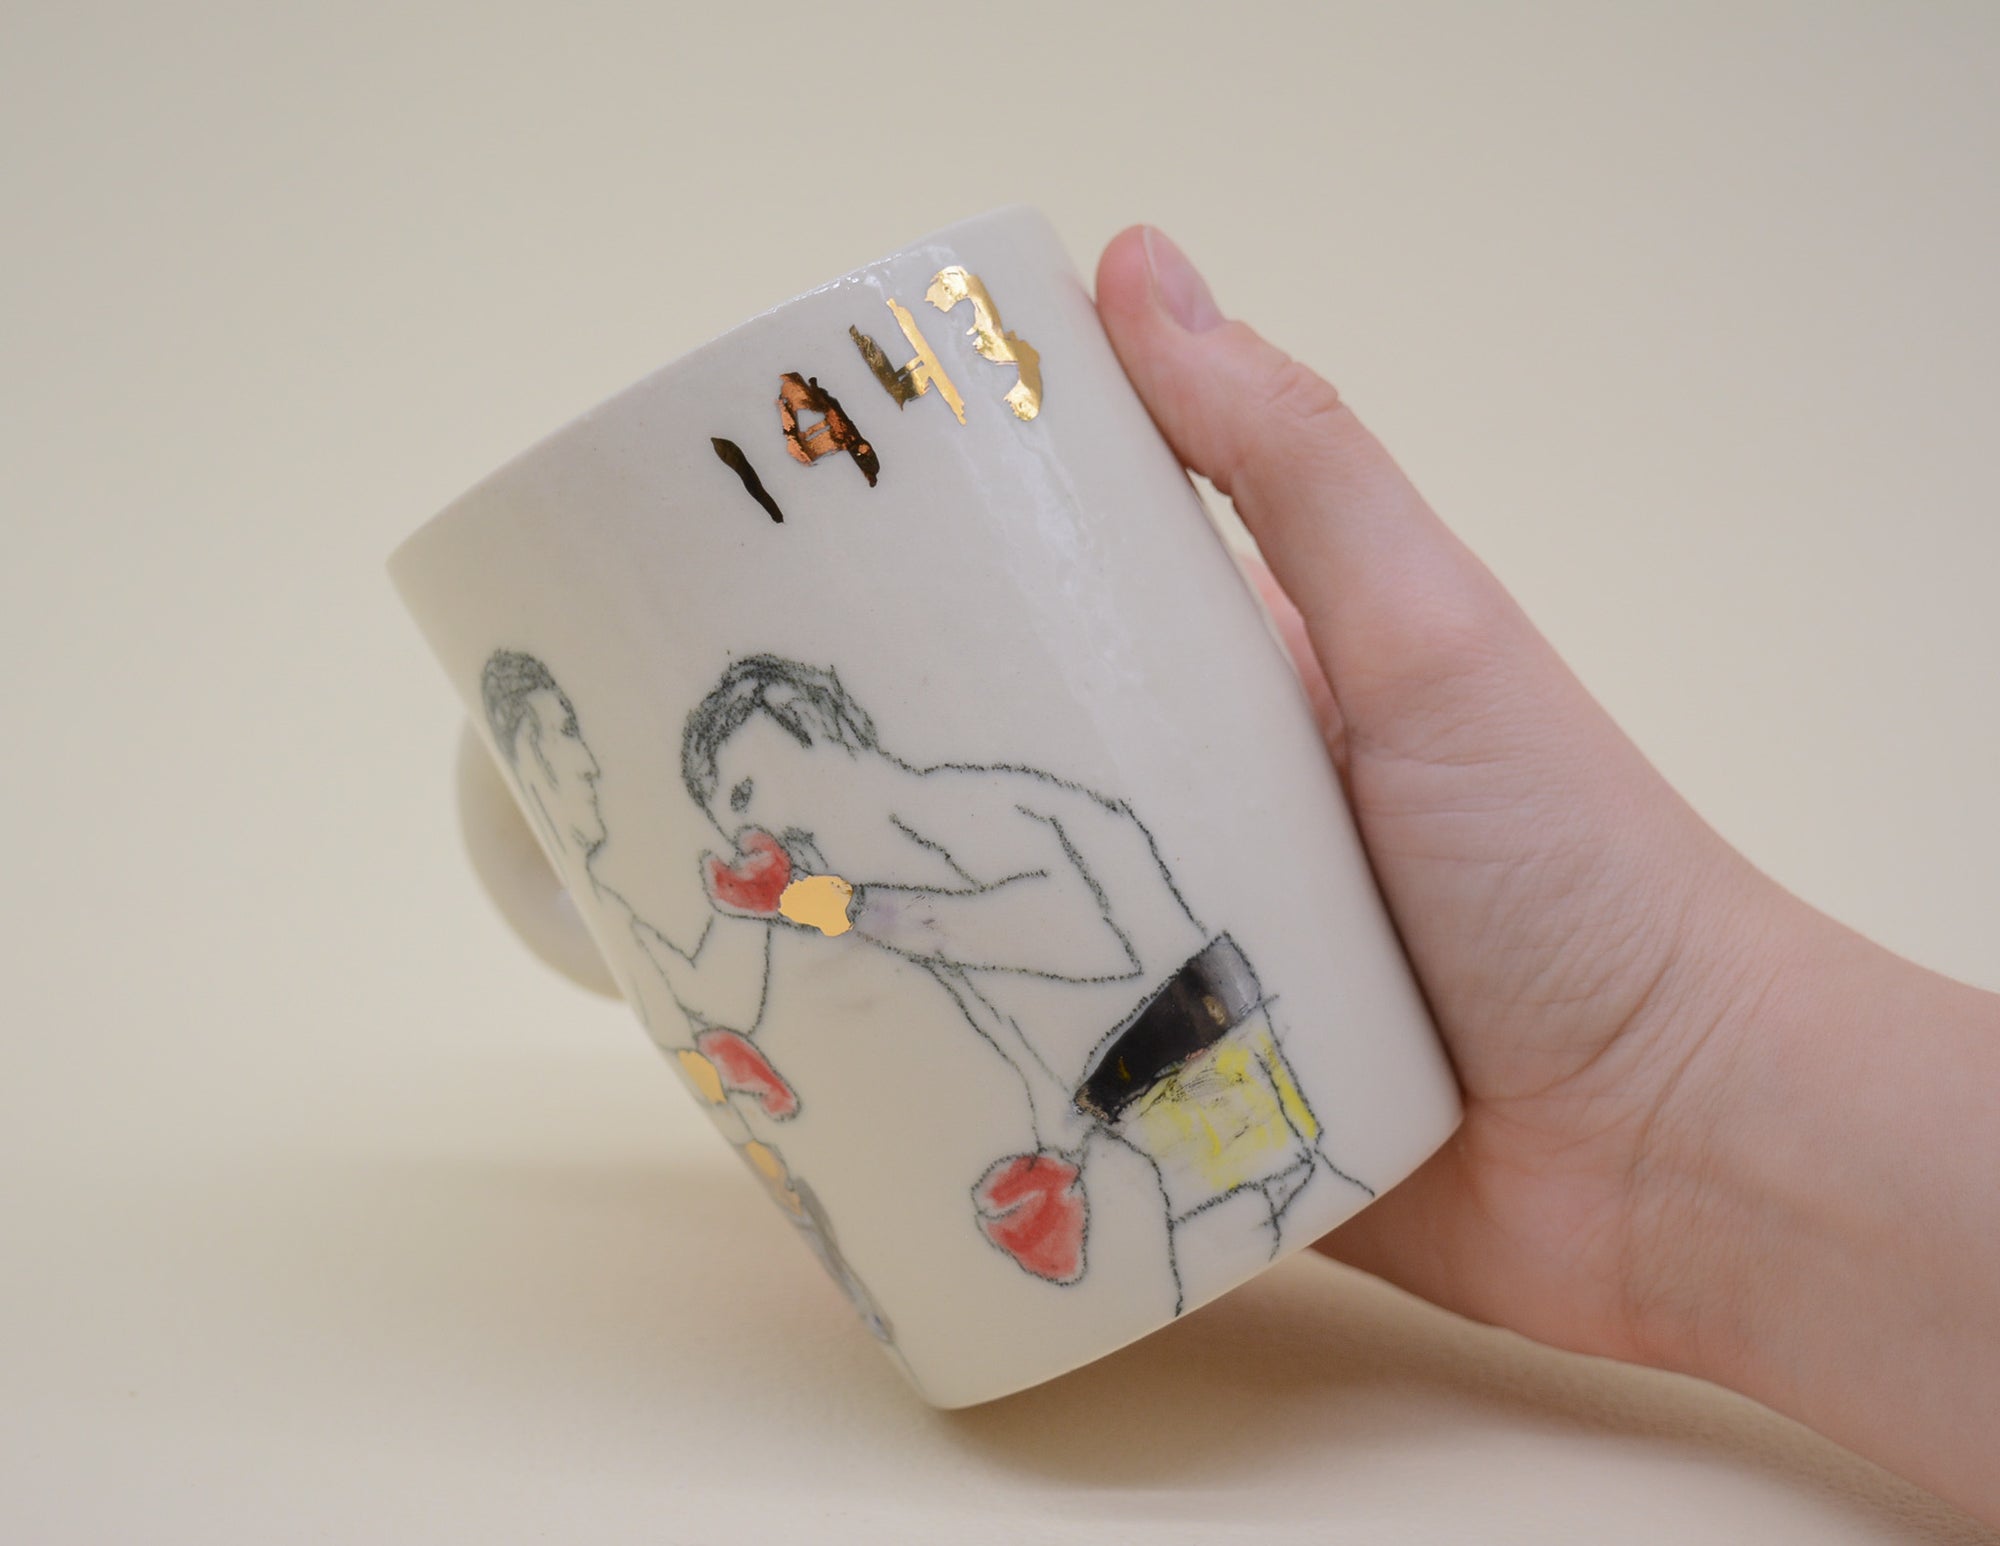 The Boxers Cup